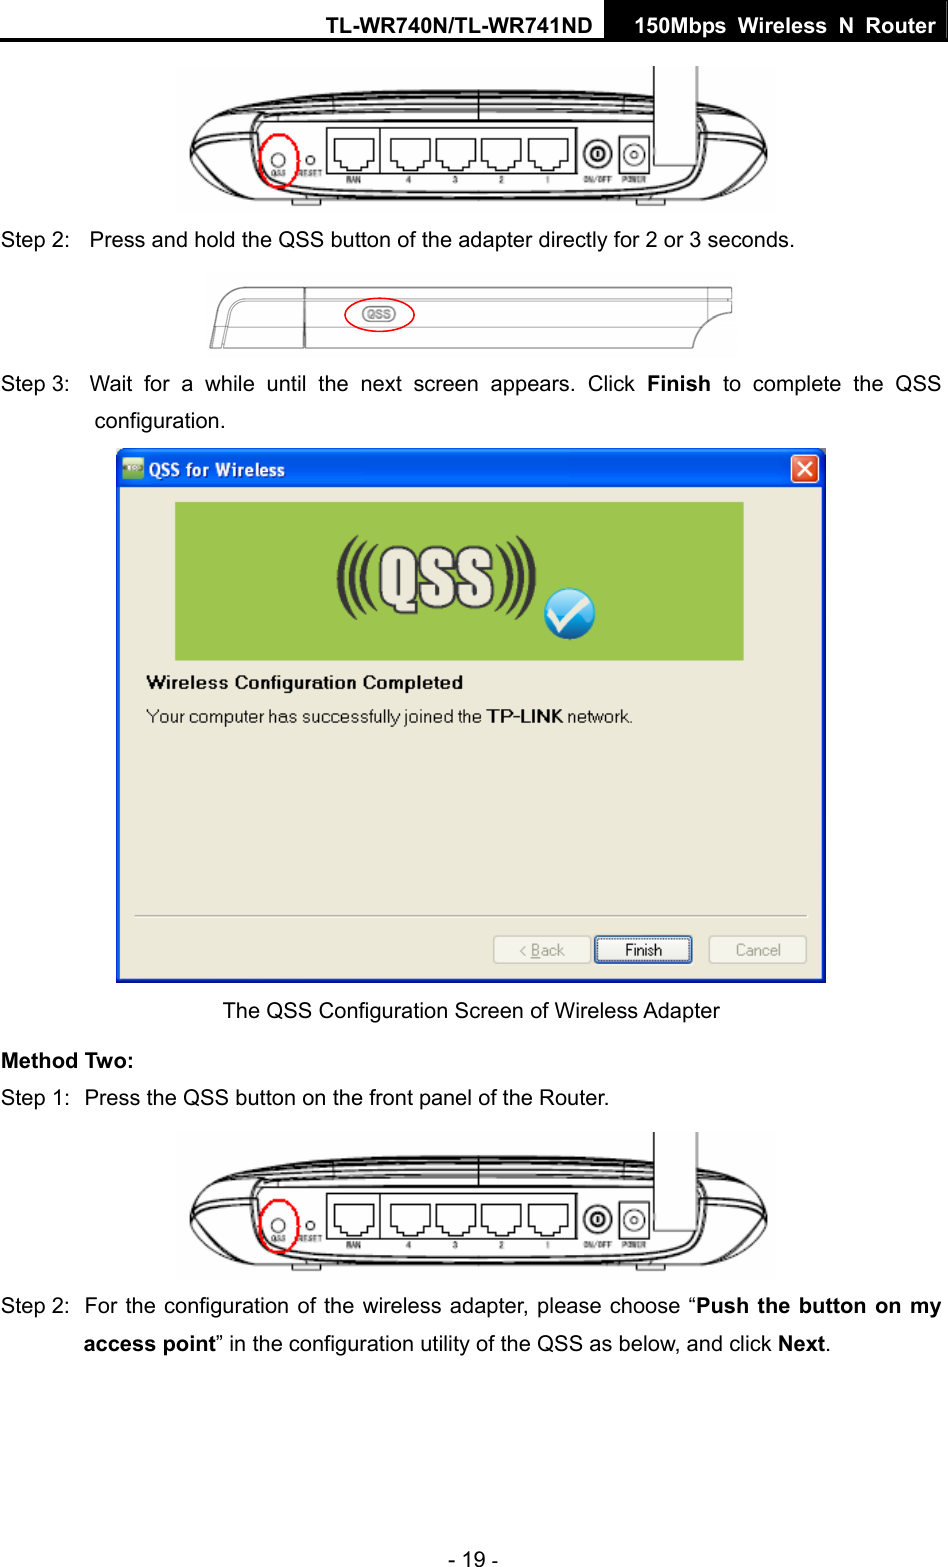 TL-WR740N/TL-WR741ND 150Mbps Wireless N Router - 19 -    Step 2:  Press and hold the QSS button of the adapter directly for 2 or 3 seconds.  Step 3:  Wait for a while until the next screen appears. Click Finish to complete the QSS configuration.  The QSS Configuration Screen of Wireless Adapter   Method Two: Step 1:  Press the QSS button on the front panel of the Router.   Step 2:  For the configuration of the wireless adapter, please choose “Push the button on my access point” in the configuration utility of the QSS as below, and click Next.  